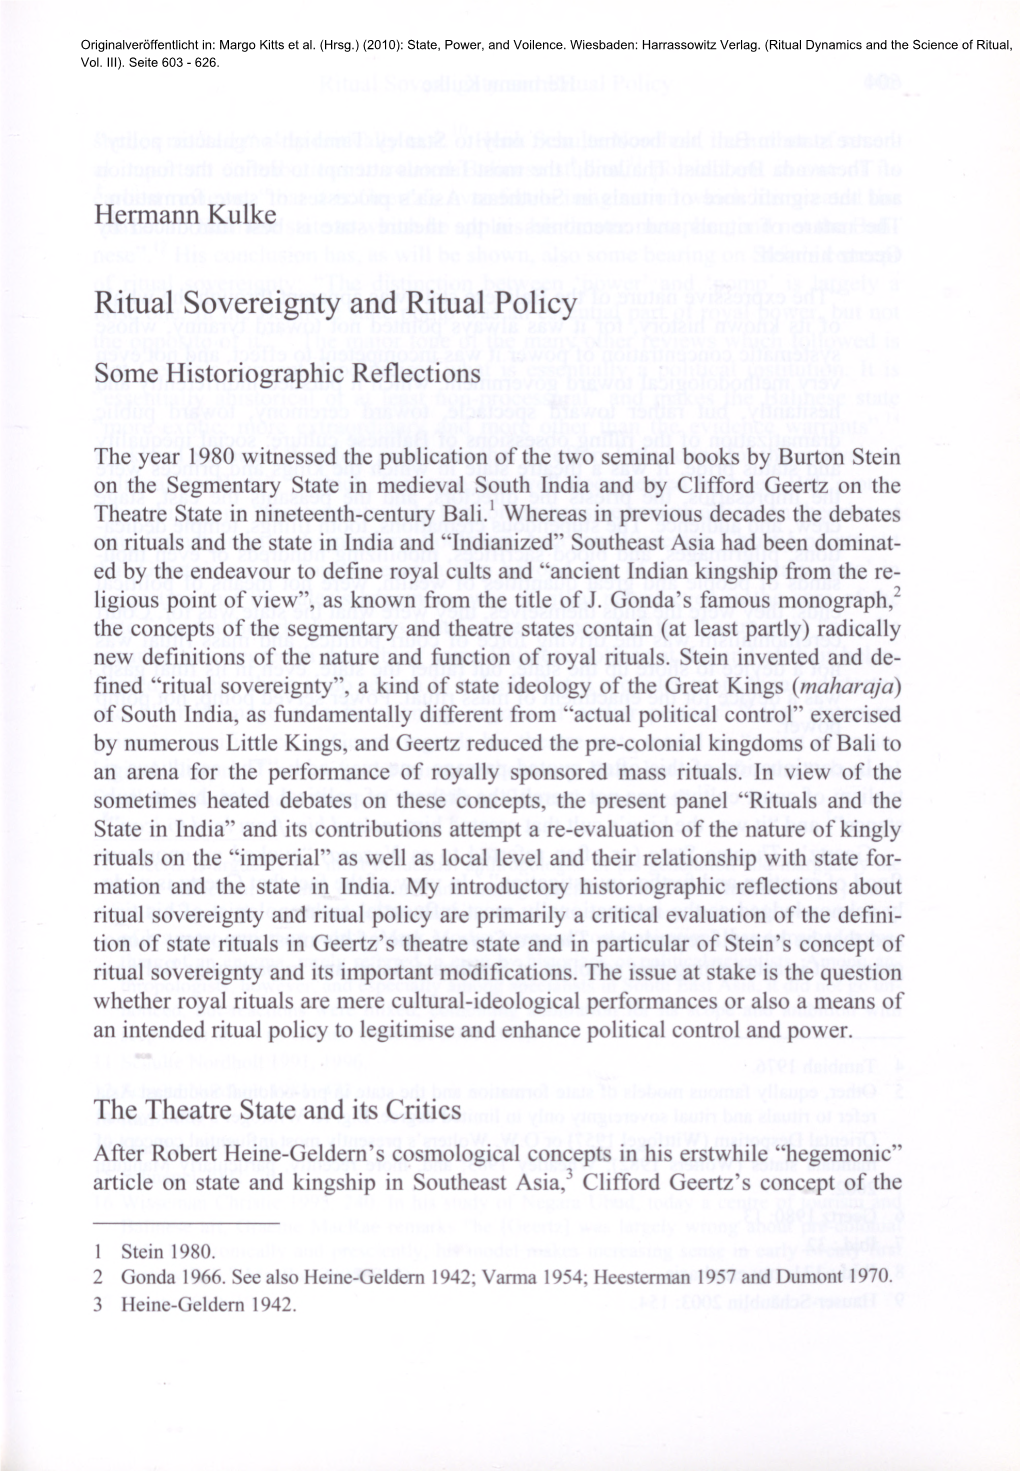 Ritual Sovereignty and Ritual Policy